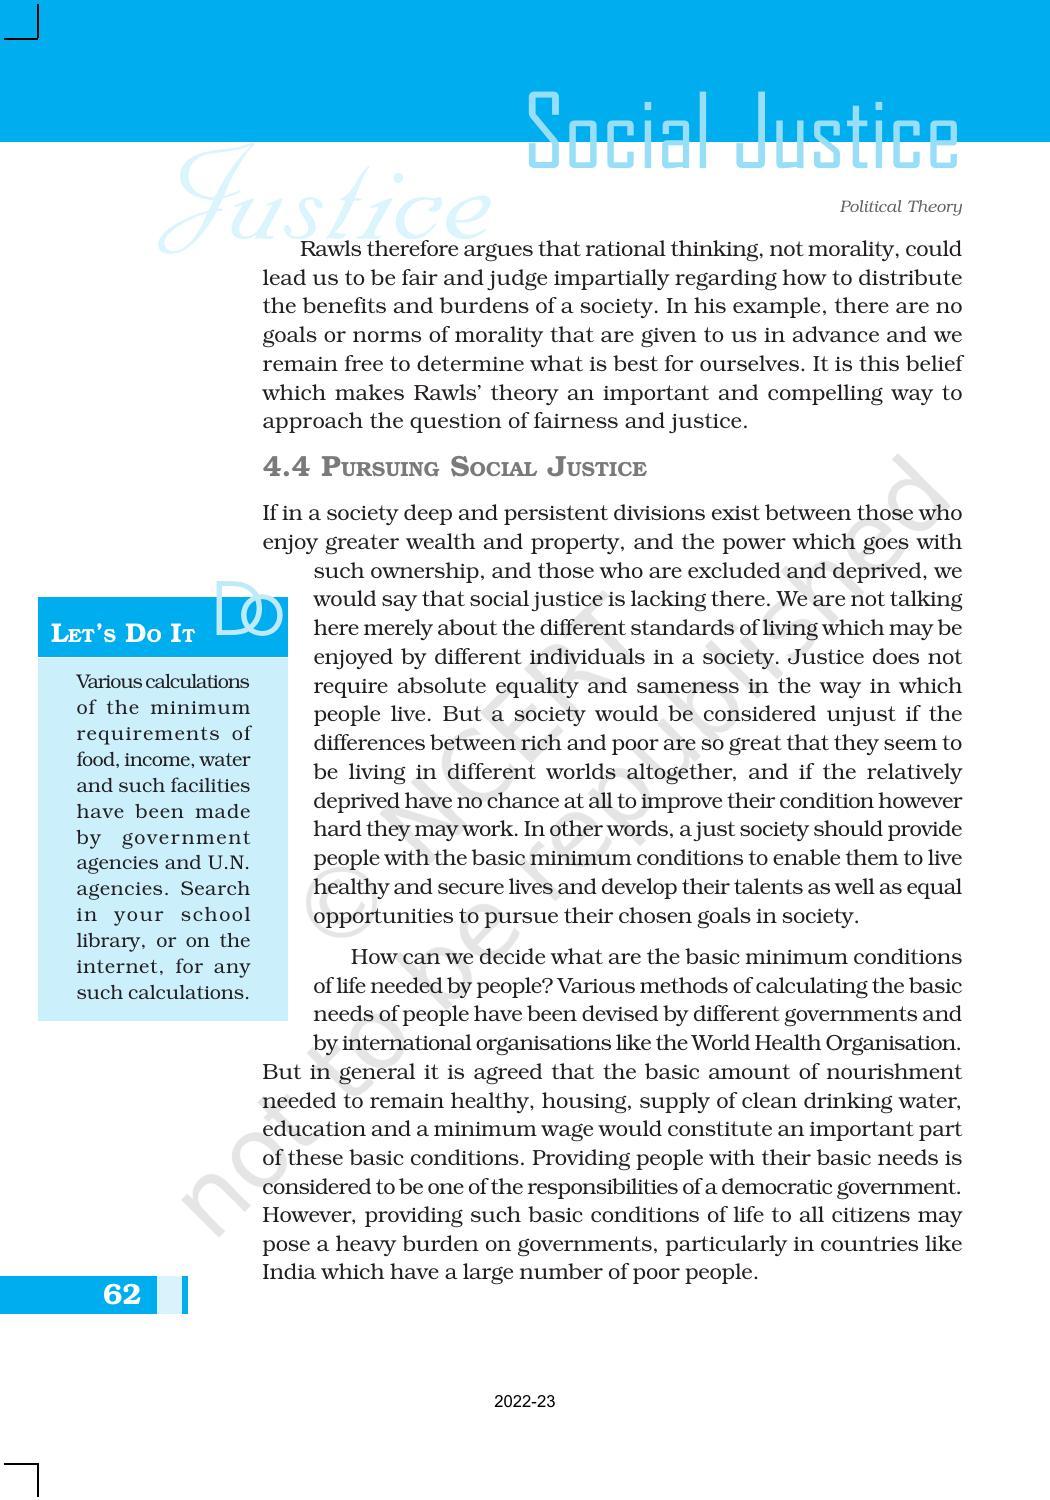 NCERT Book for Class 11 Political Science (Political Theory) Chapter 4 Social Justice - Page 10